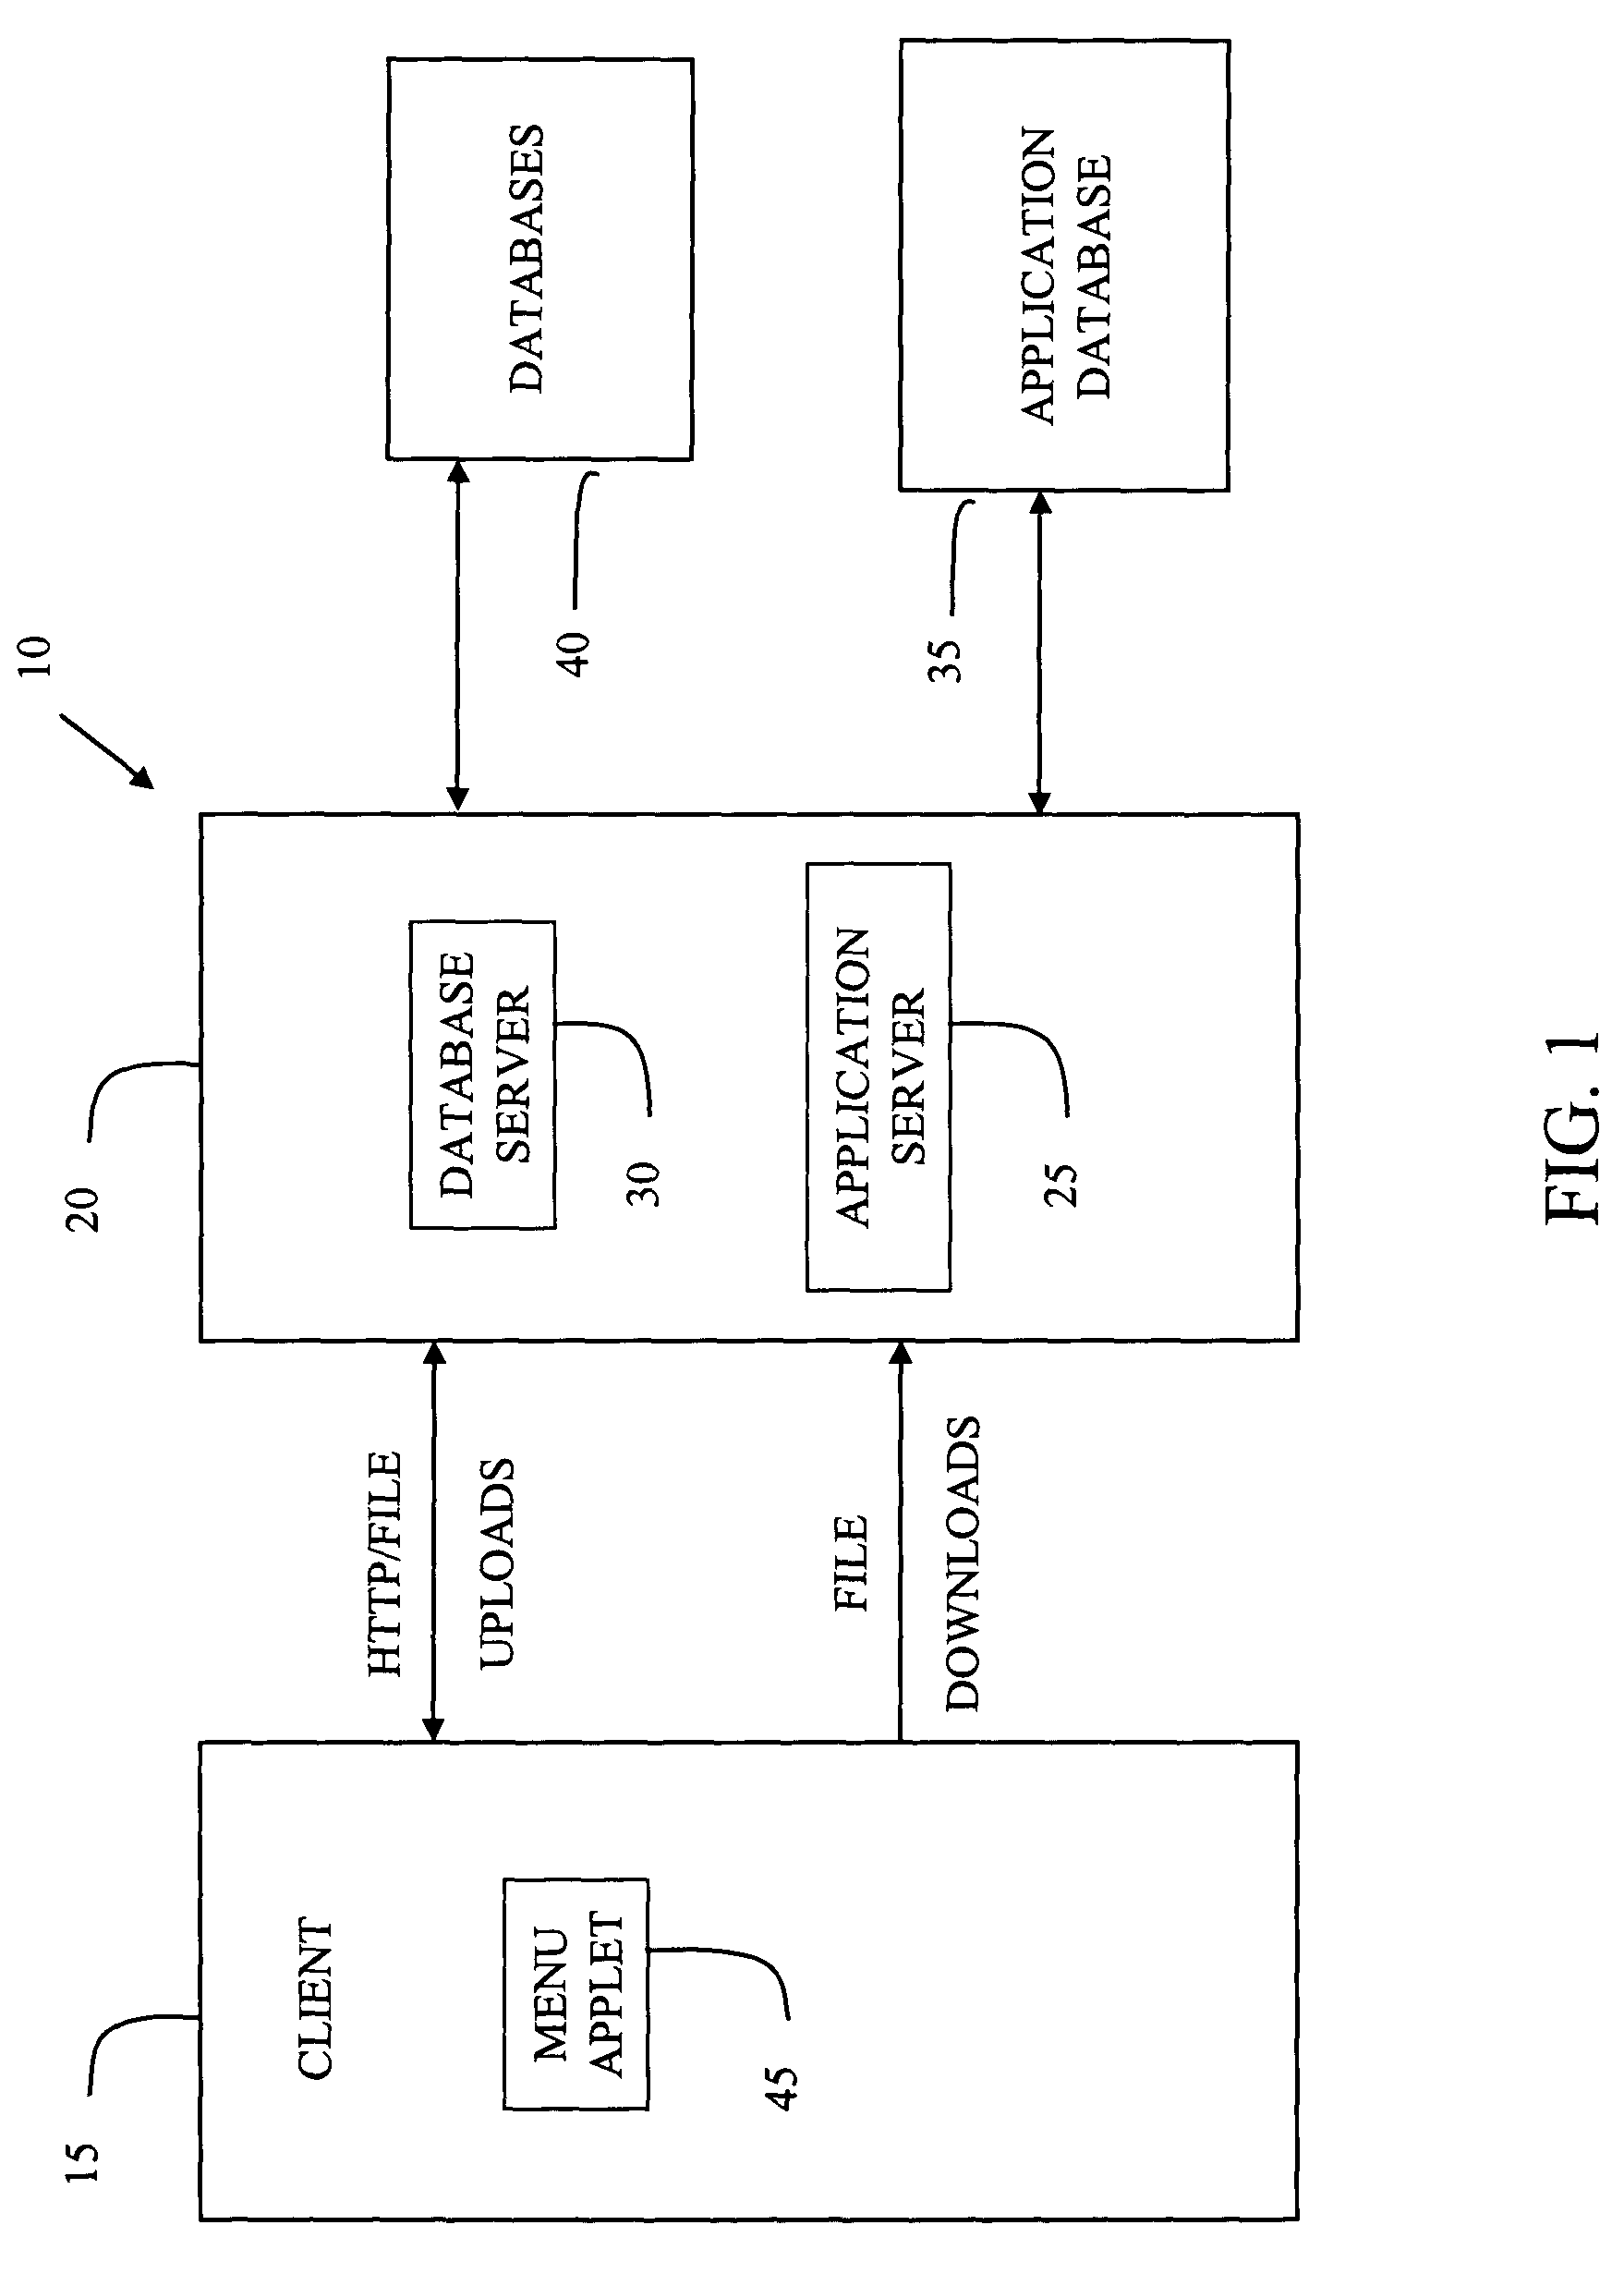 System and method for managing risks associated with outside service providers